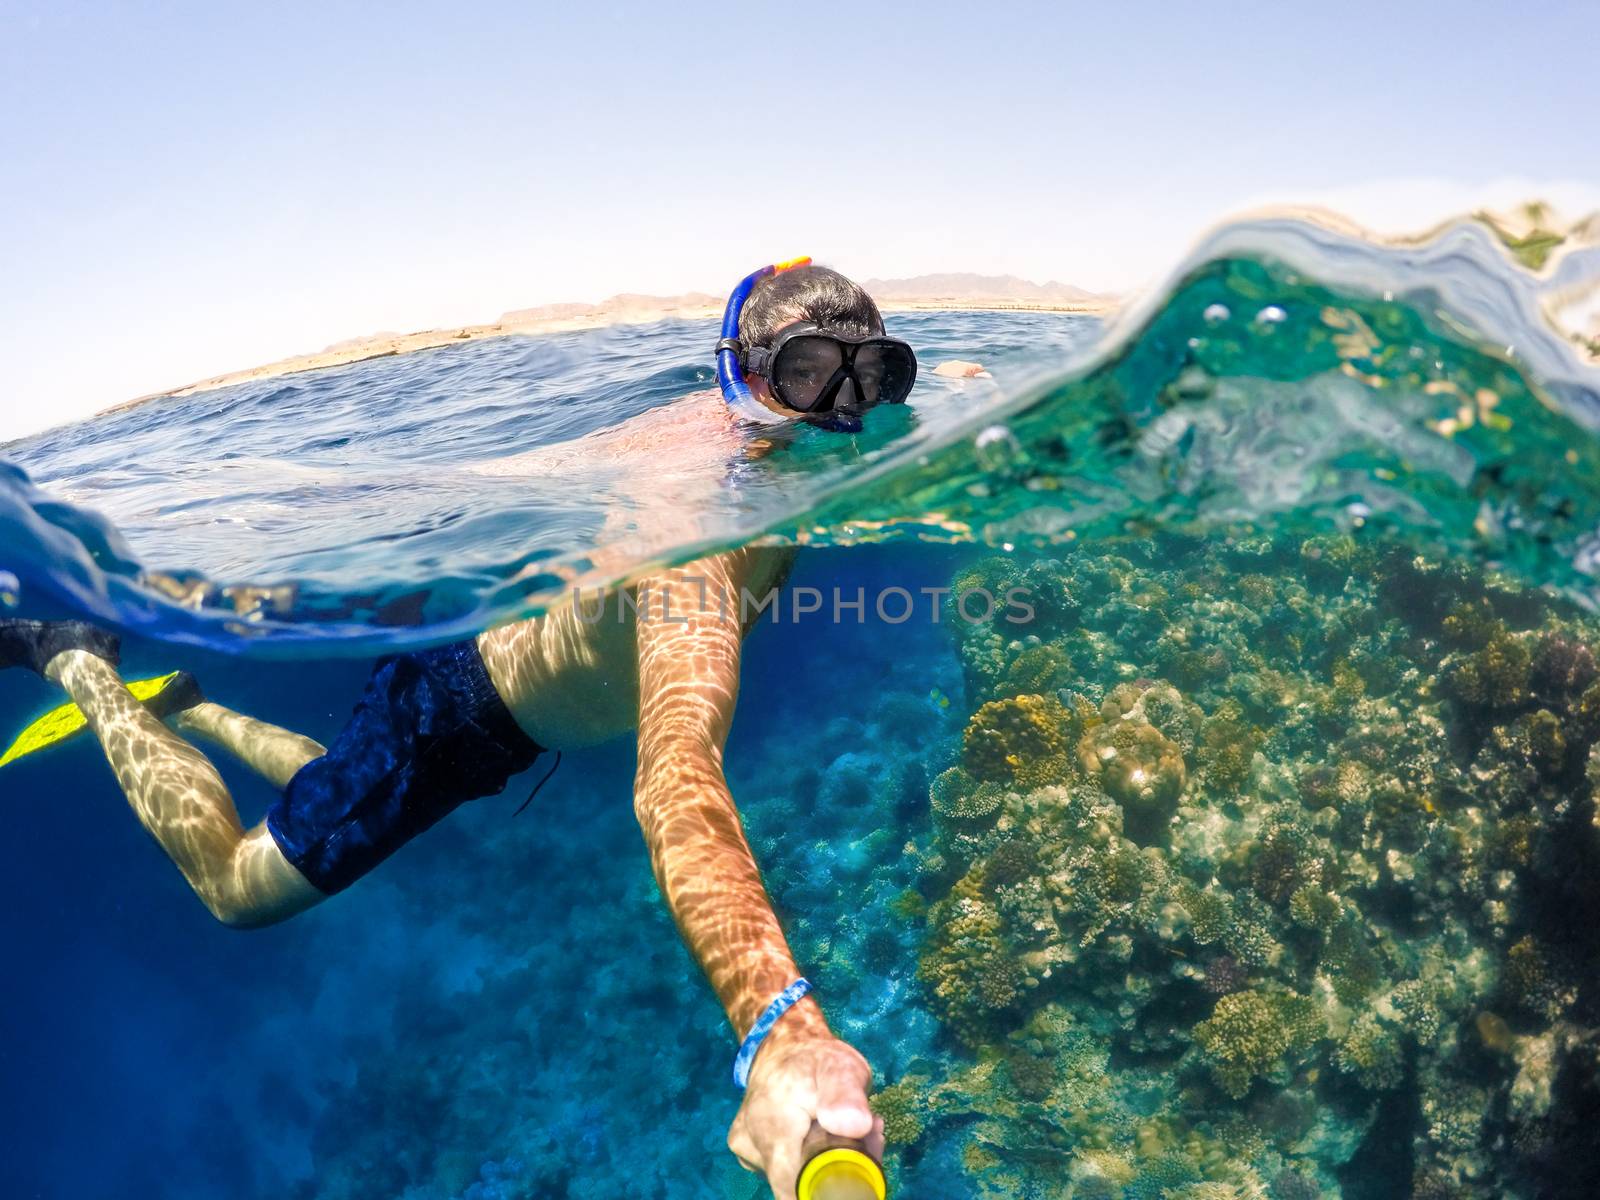 Underwater and surface split view in the tropics paradise with snorkeling man, fish and coral reef, under and above waterline, beautiful view on tropical sea. Safaga, Egypt. Holiday snorkeling vacation concept